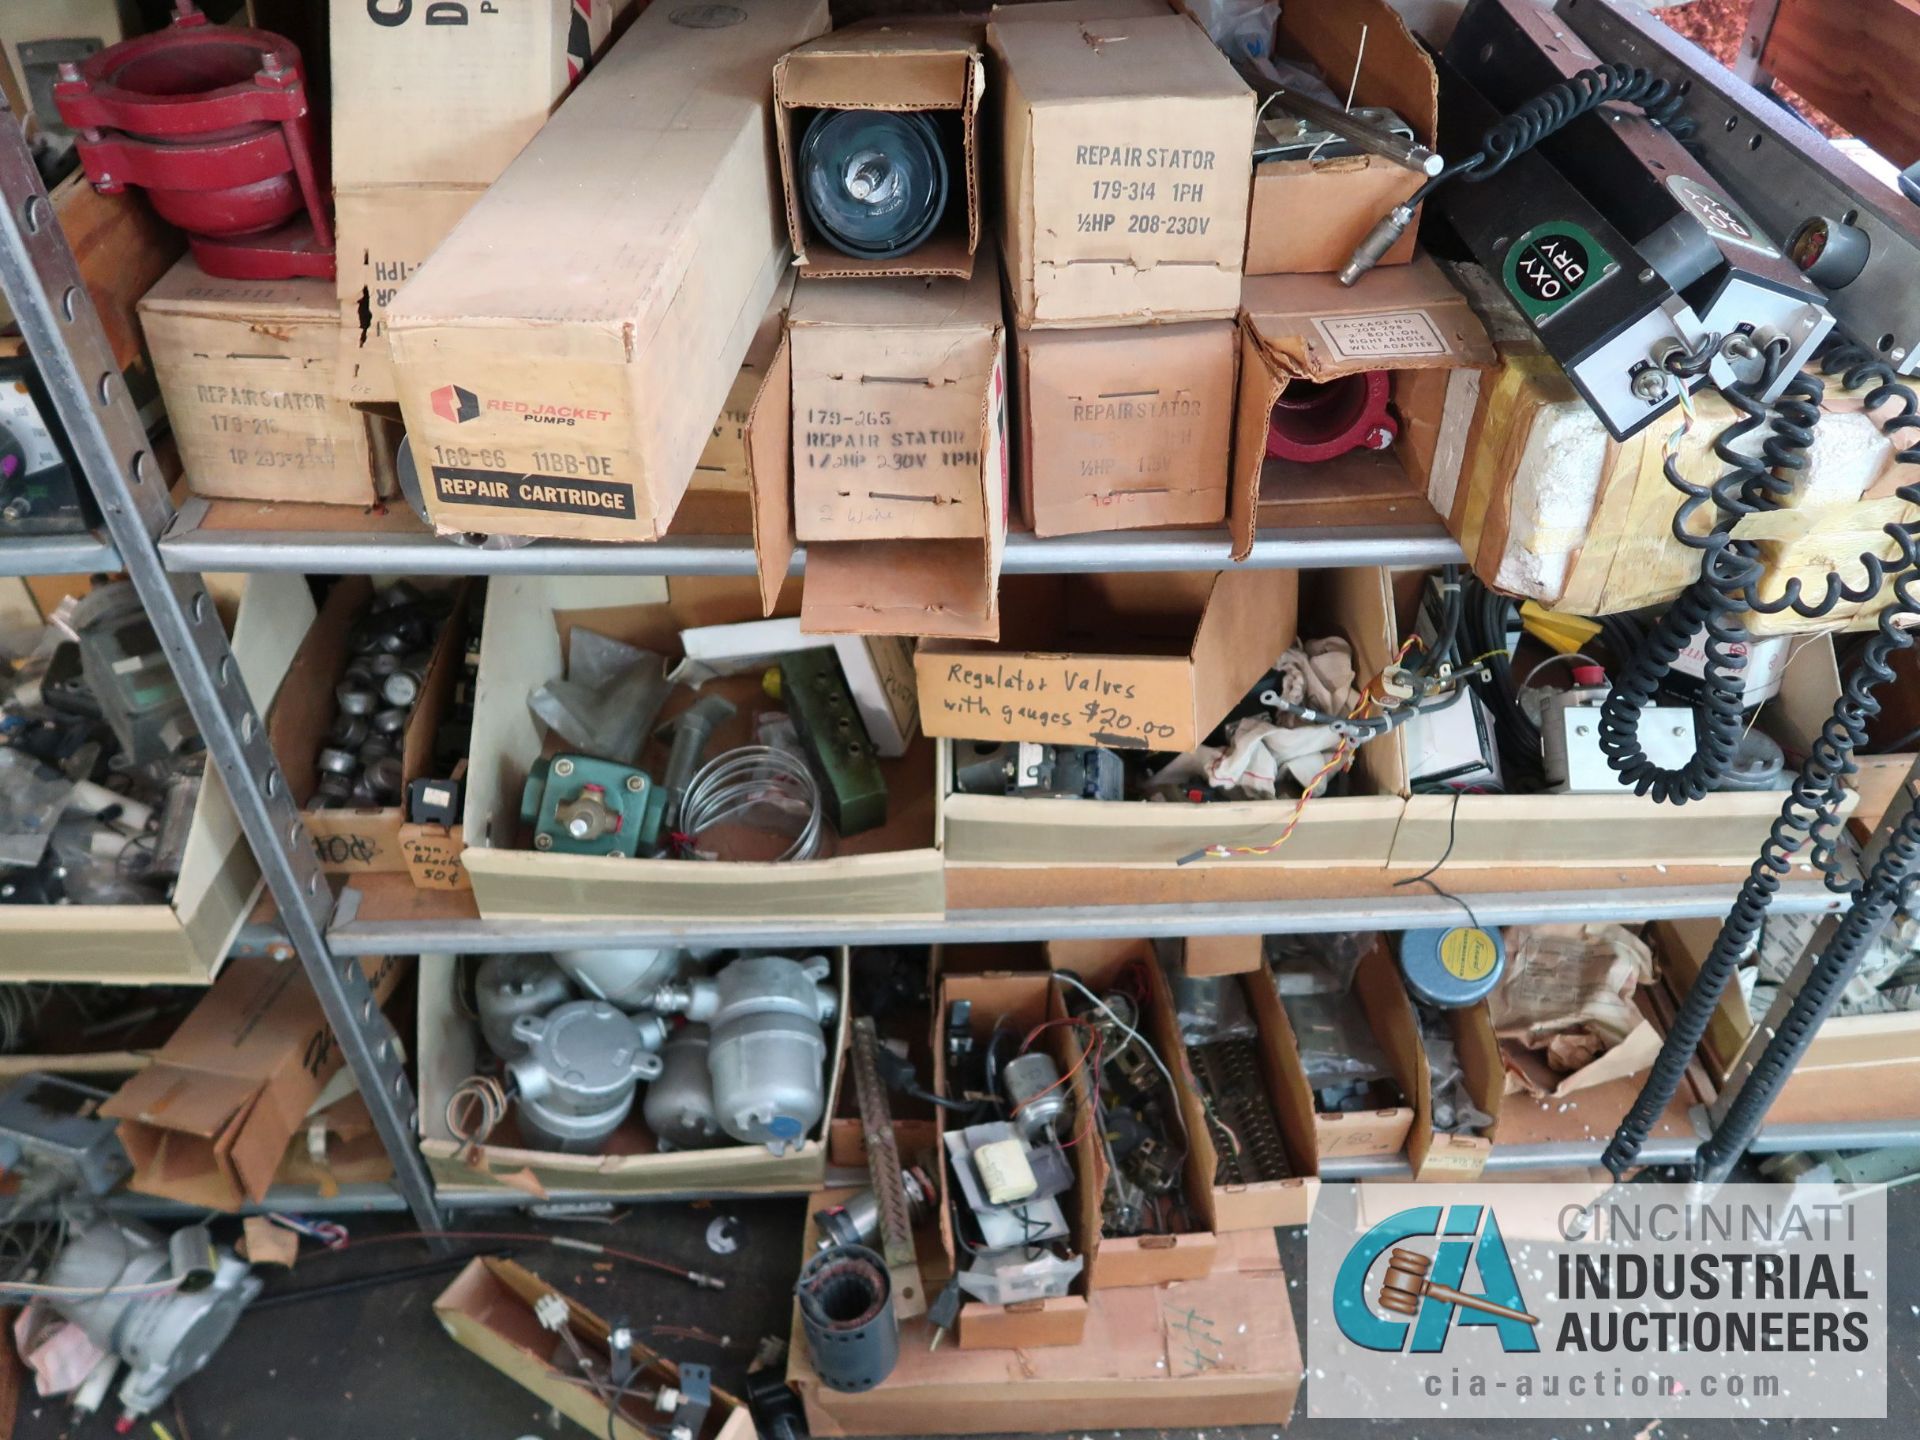 CONTENTS OF (16) SHELVES INCLUDING MISCELLANEOUS VALVES, THERMOSTATS, ANALYZERS, ELECTRICAL, CONTROL - Image 31 of 47